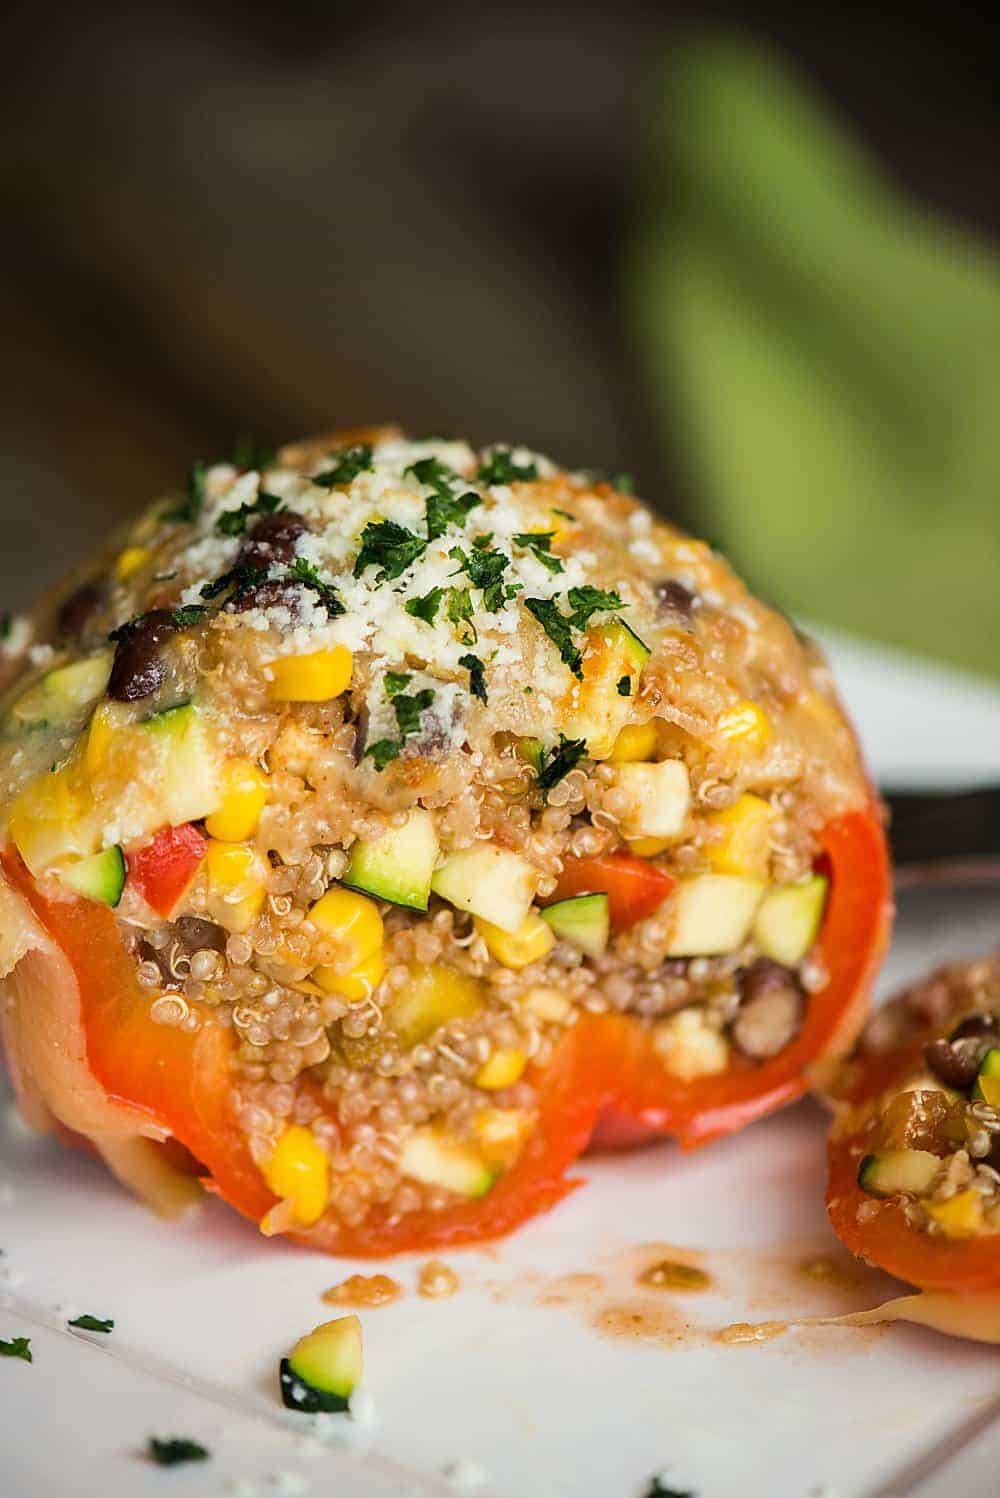 Southwestern Quinoa Stuffed Peppers are a flavorful and fantastic choice if you're searching for healthy vegetarian stuffed peppers without rice.